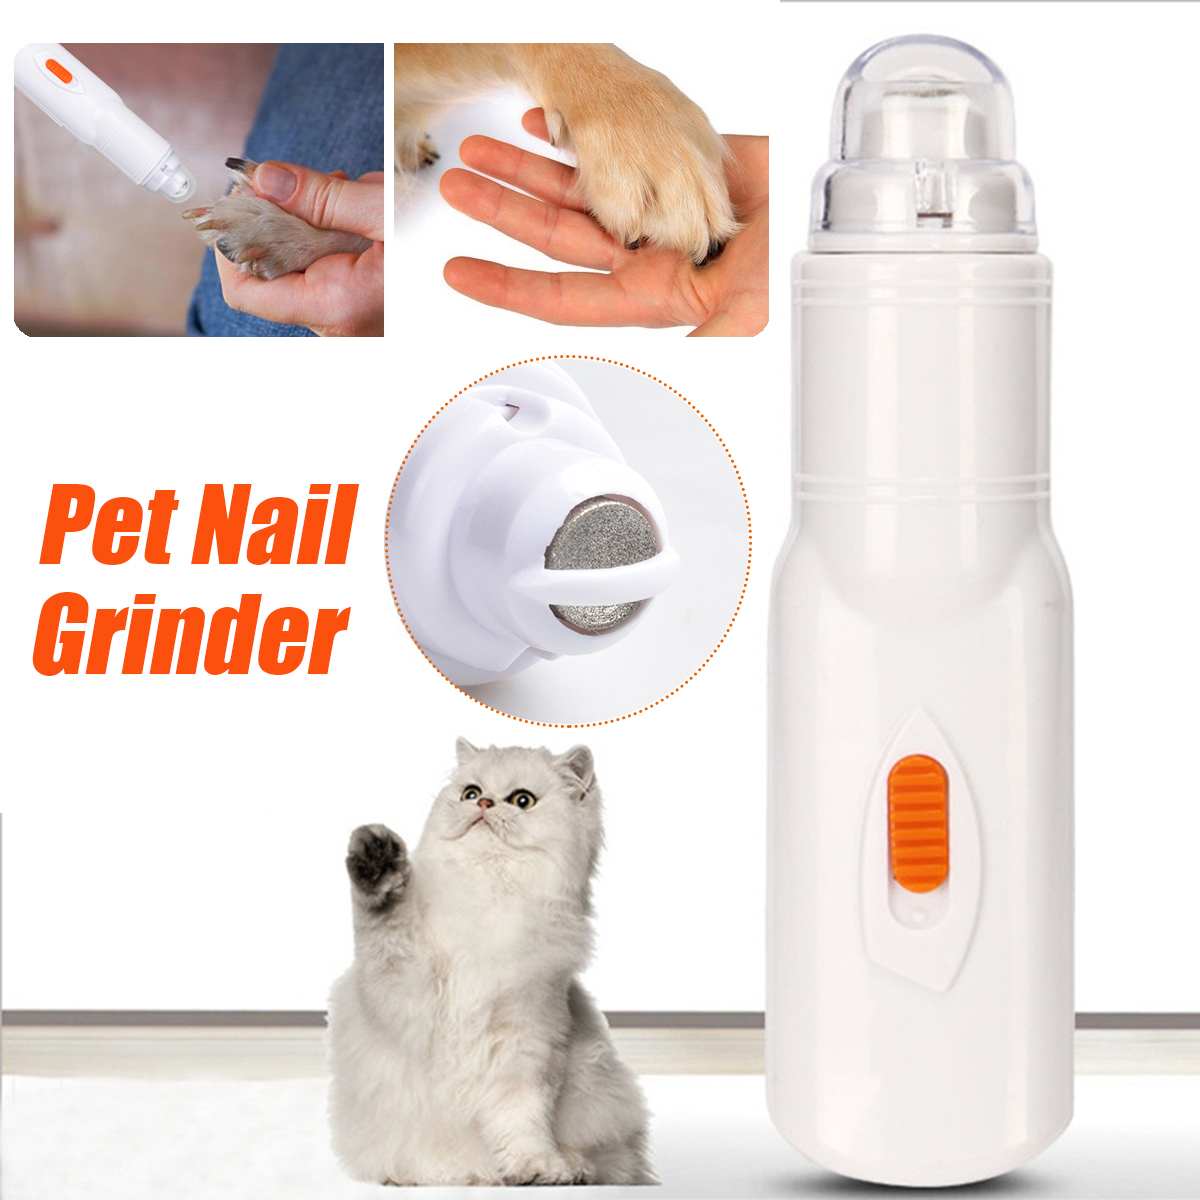 Pet-Dog-Cat-Nail-Electric-Grinder-Clipper-Claw-Grooming-Trimmer-Sharpener-Tools-1659839-5